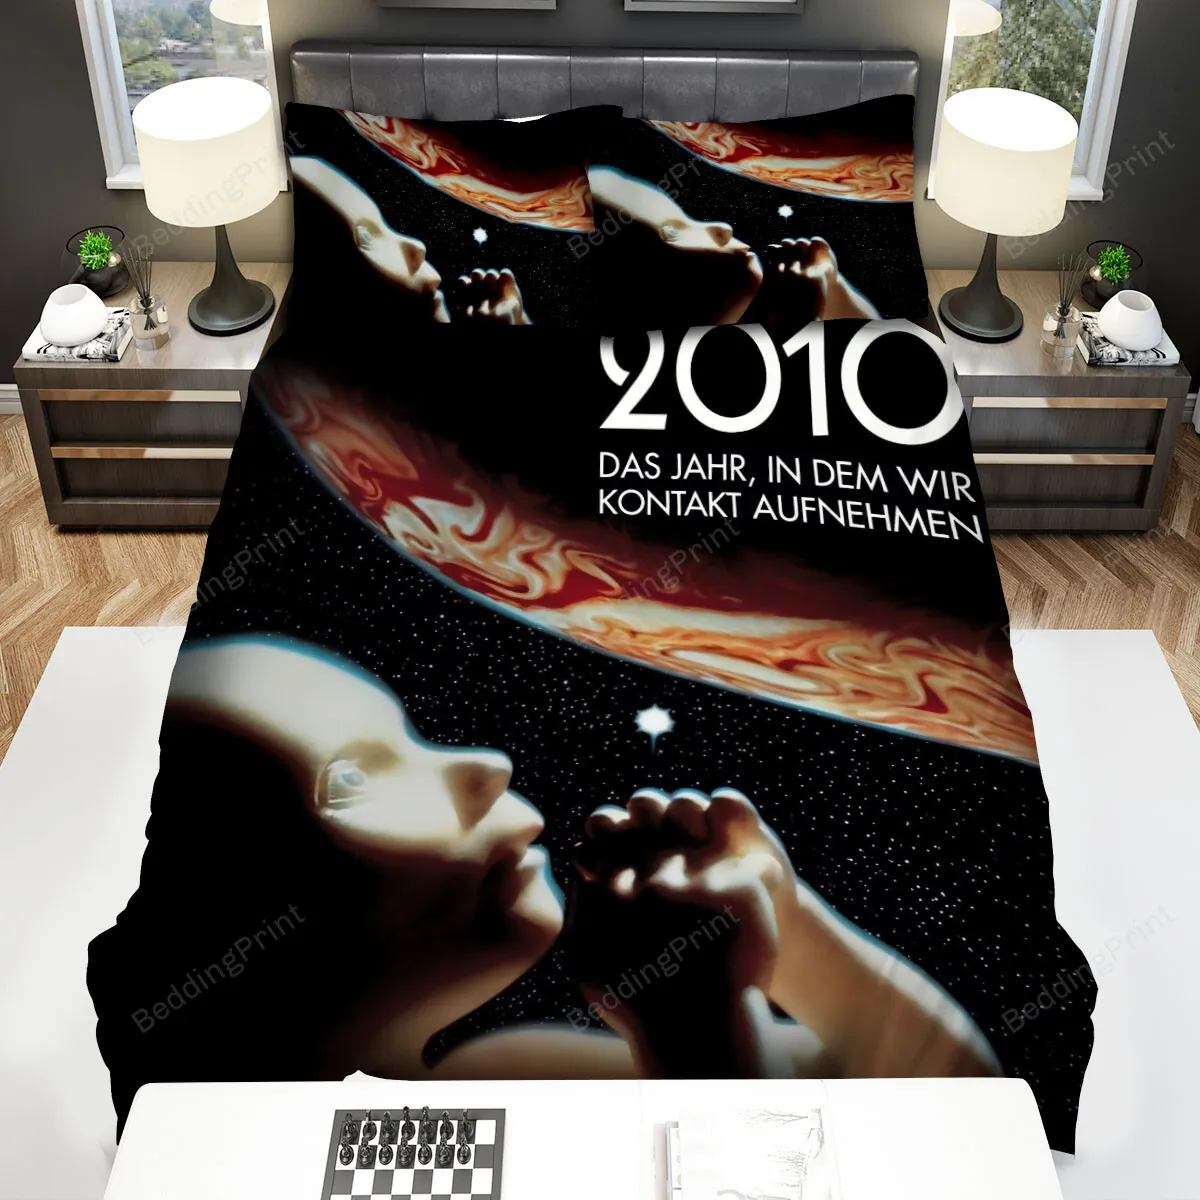 2010 The Year We Make Contact Movie Poster 3 Bed Sheets Spread Comforter Duvet Cover Bedding Sets